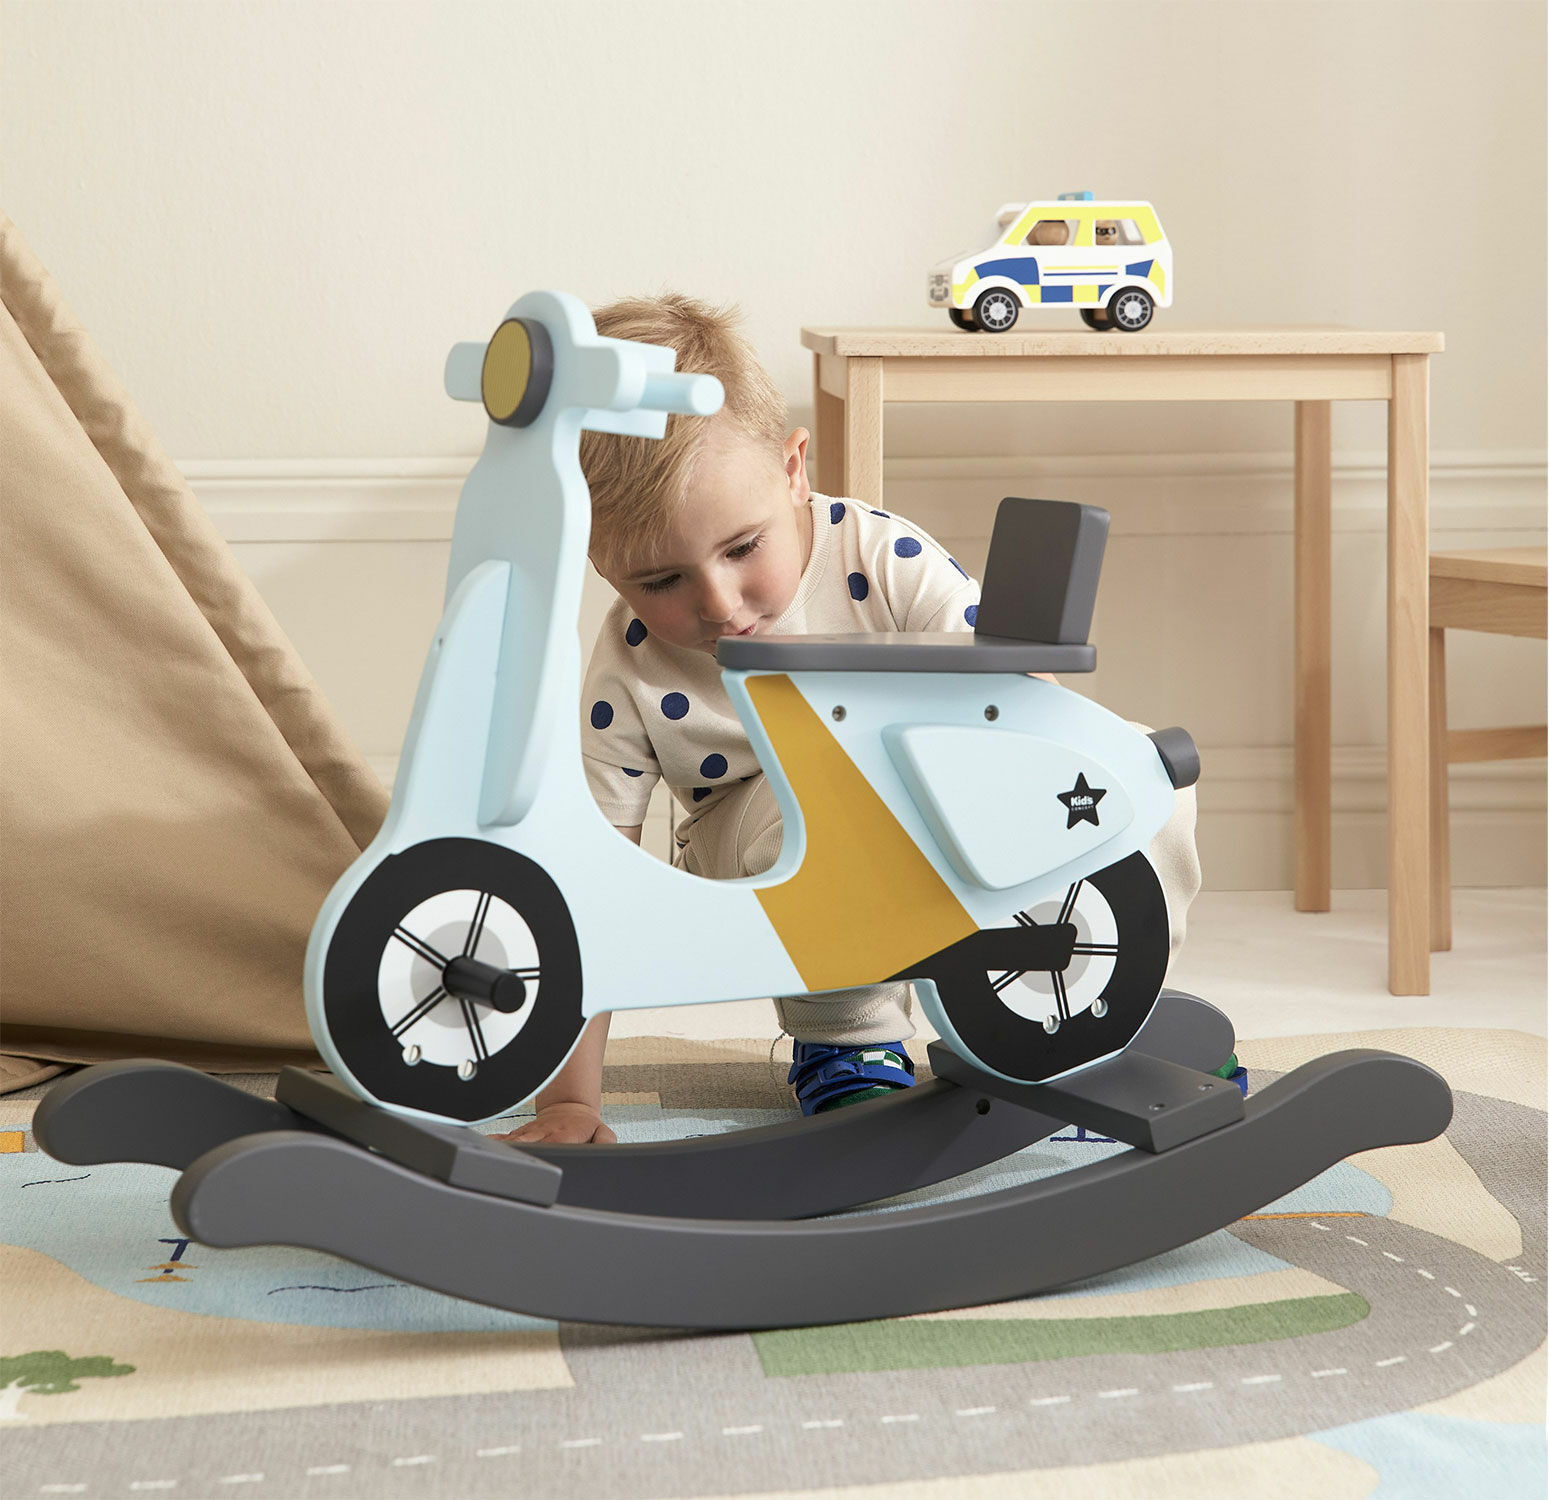 "Rocking Scooter Light Blue" (for children aged 18 months and older) by Kid's Concept